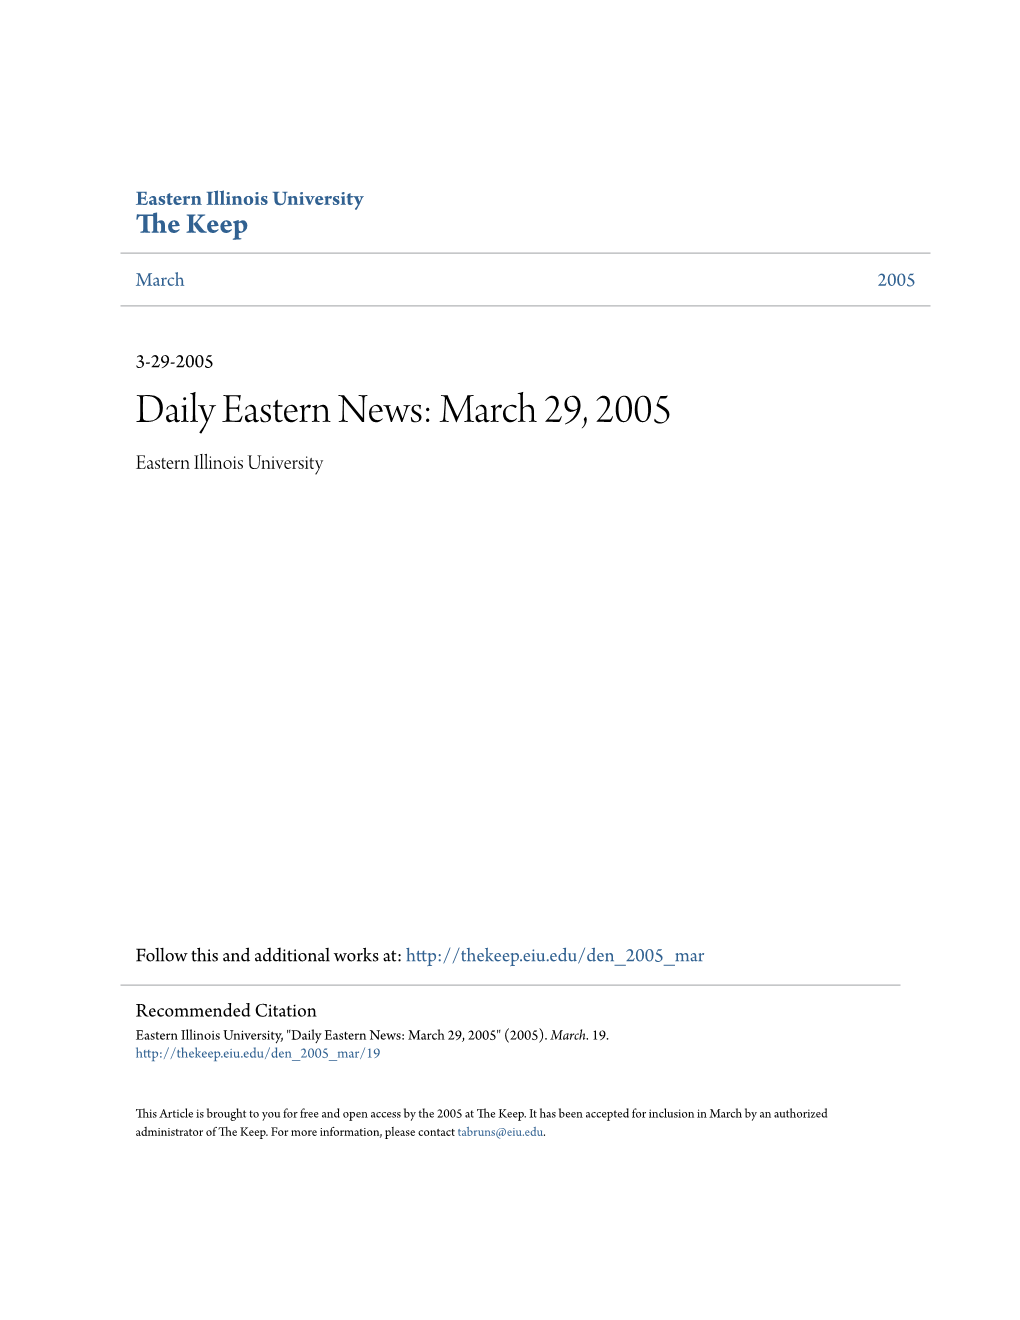 Daily Eastern News: March 29, 2005 Eastern Illinois University